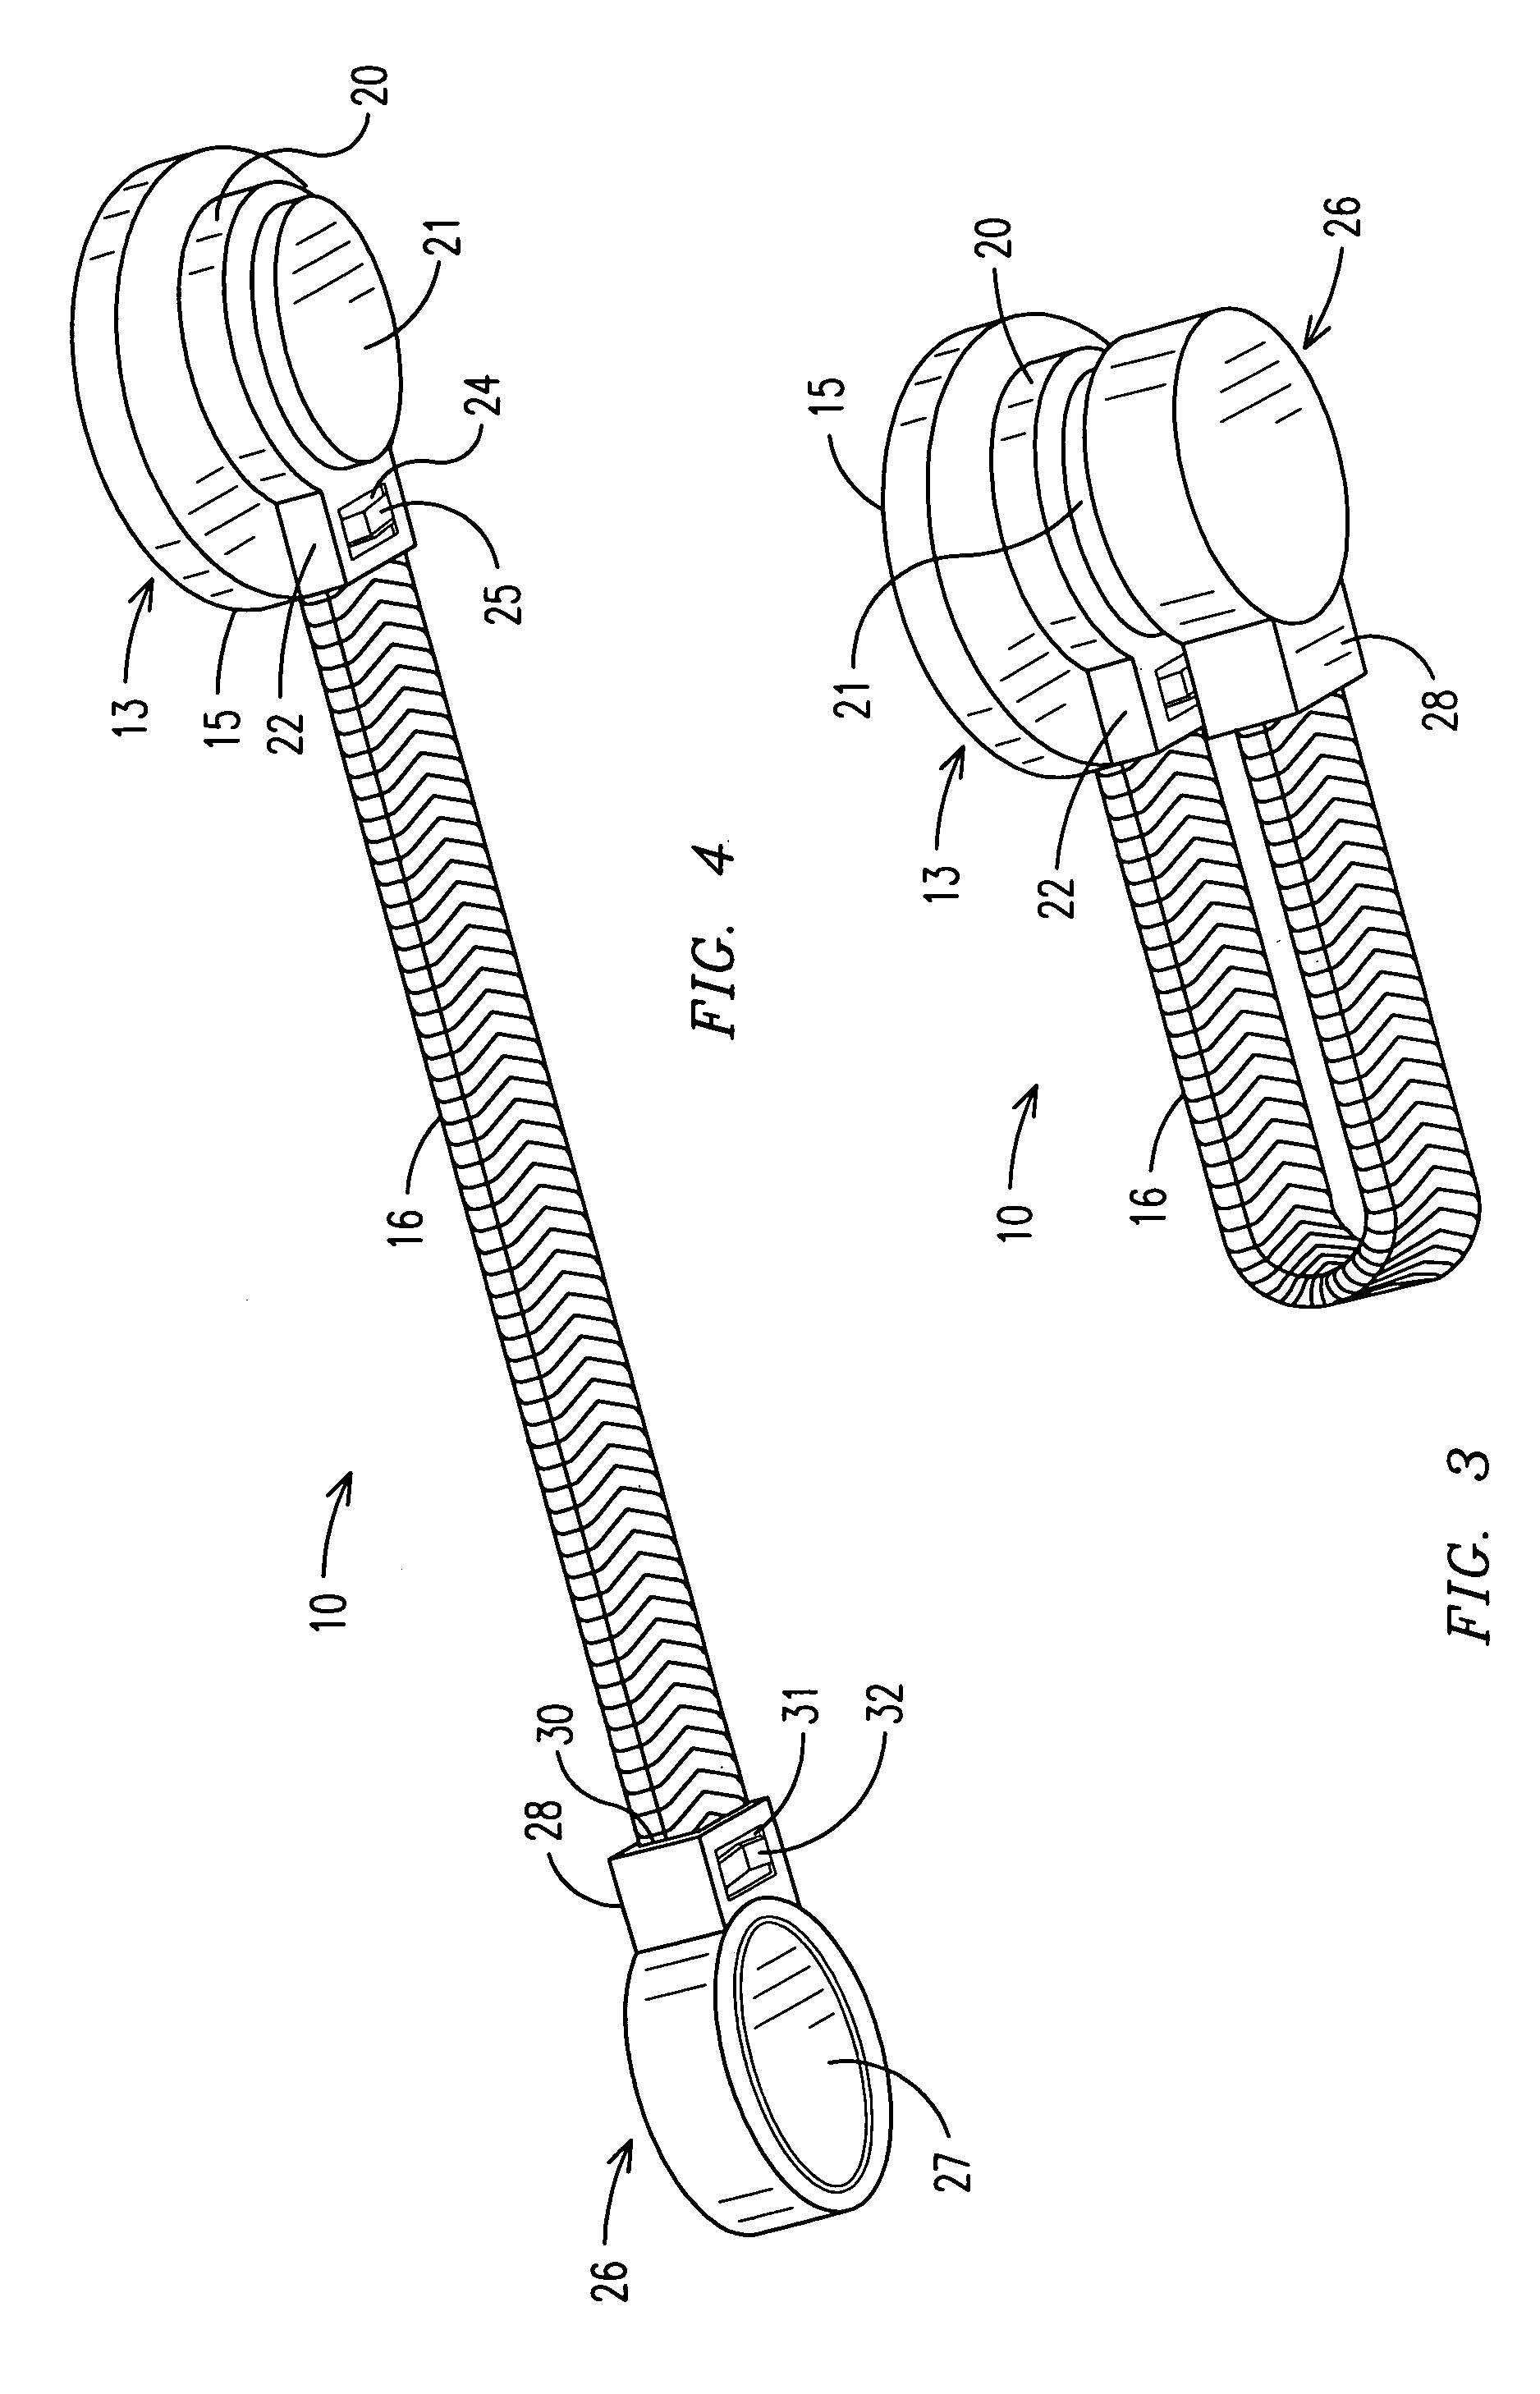 Article holding jewelry apparatus and process